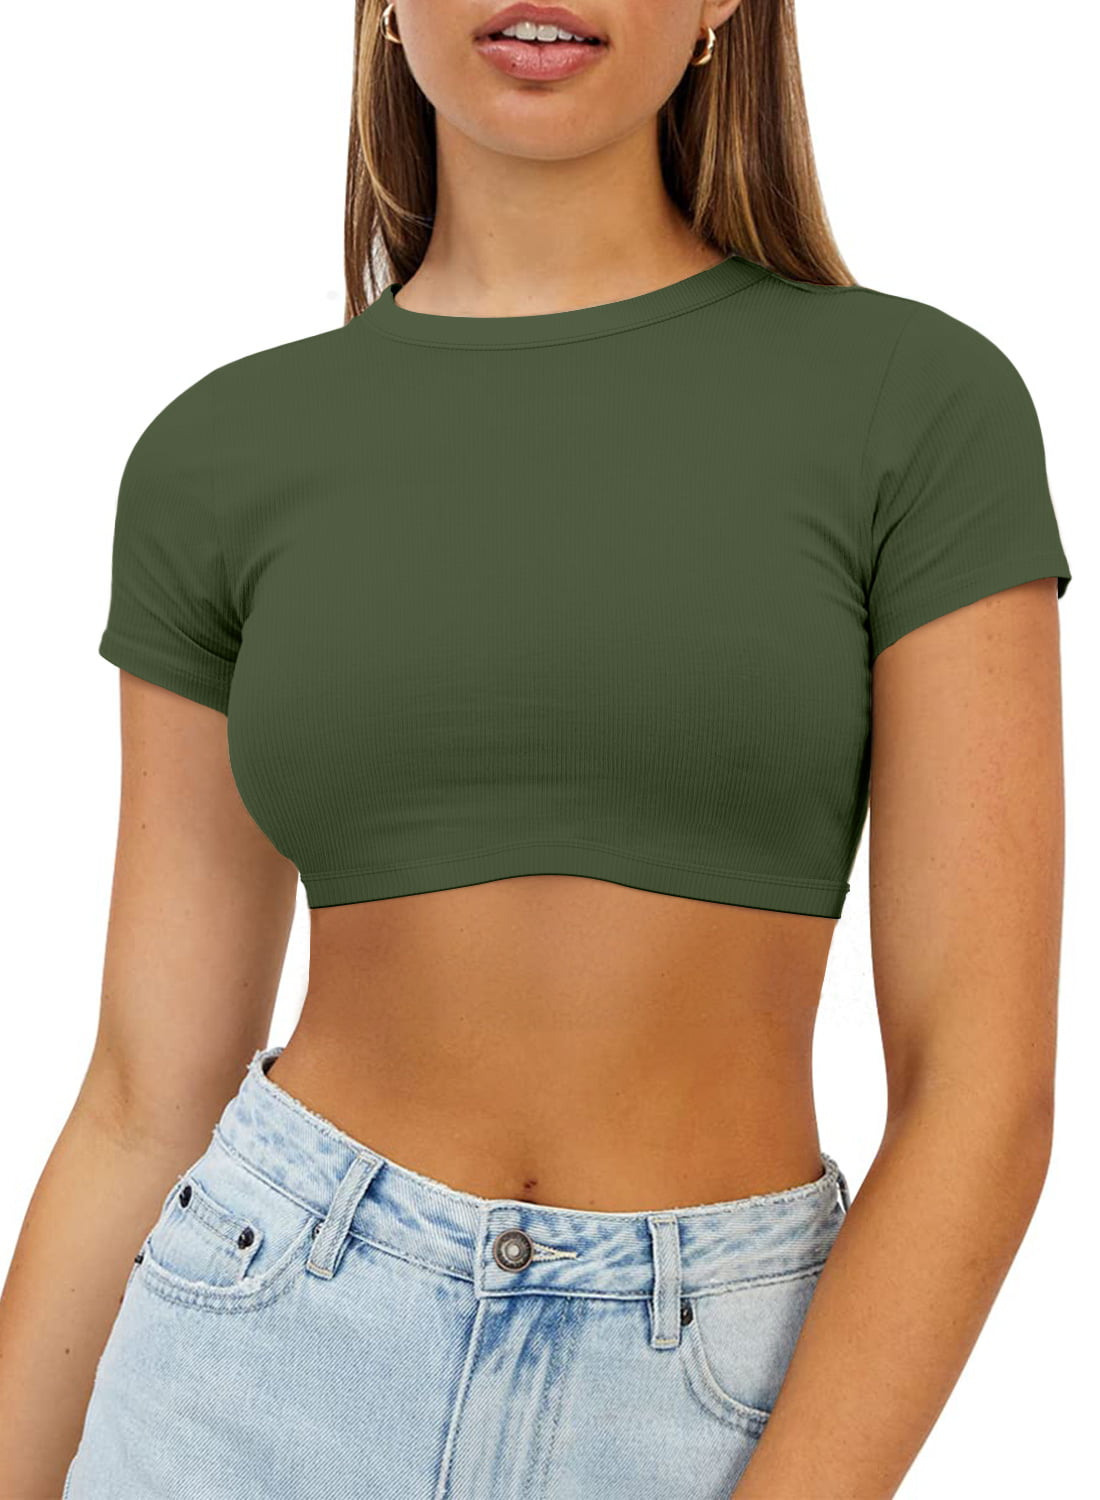 Baskuwish Women's Cute Short Sleeve High Neck Double Lined Tight T Shirts Crop Tops Tees, Crop Tops Cute Trendy Basic Tight Scoop Neck Crop Short